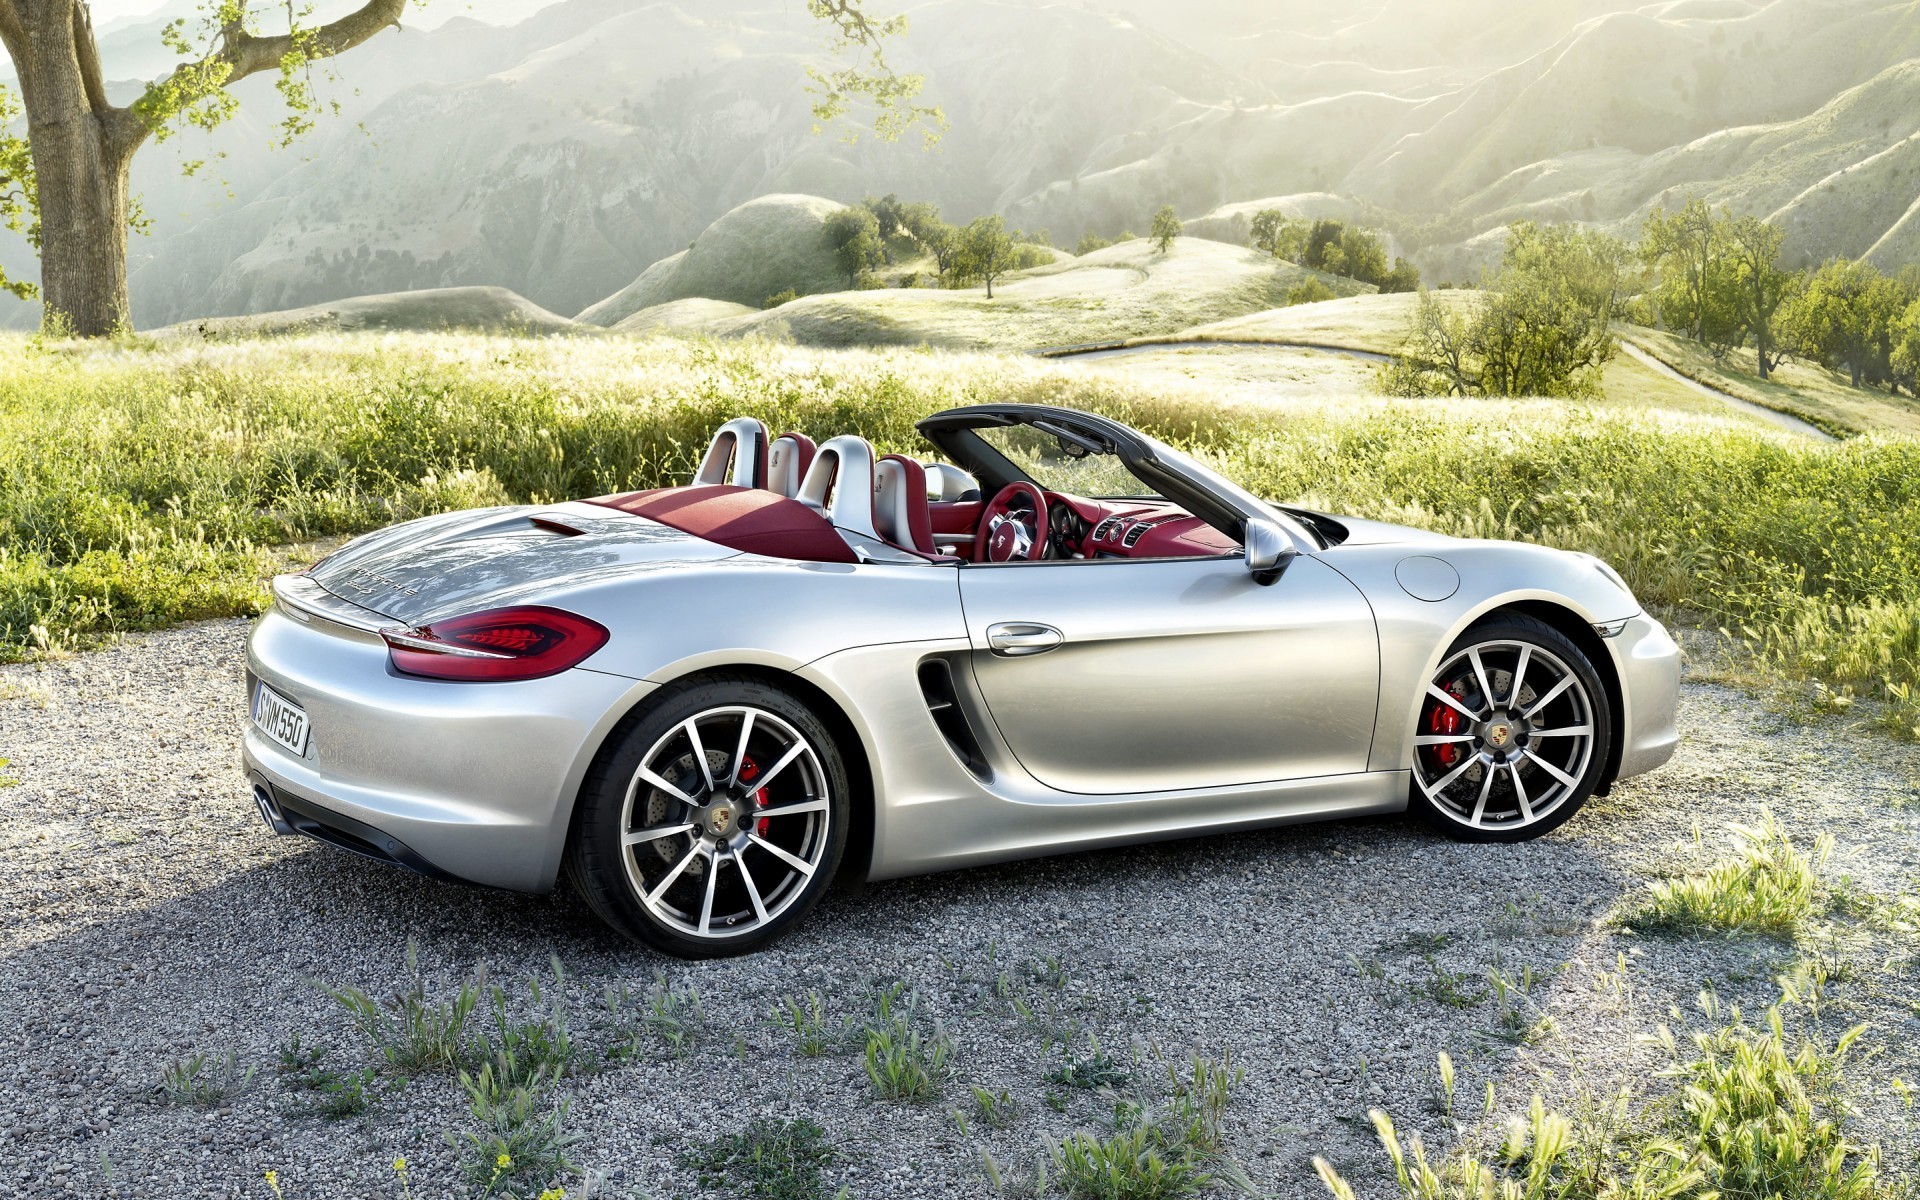 Free photo Picture of a Porsche Boxster in the wild.